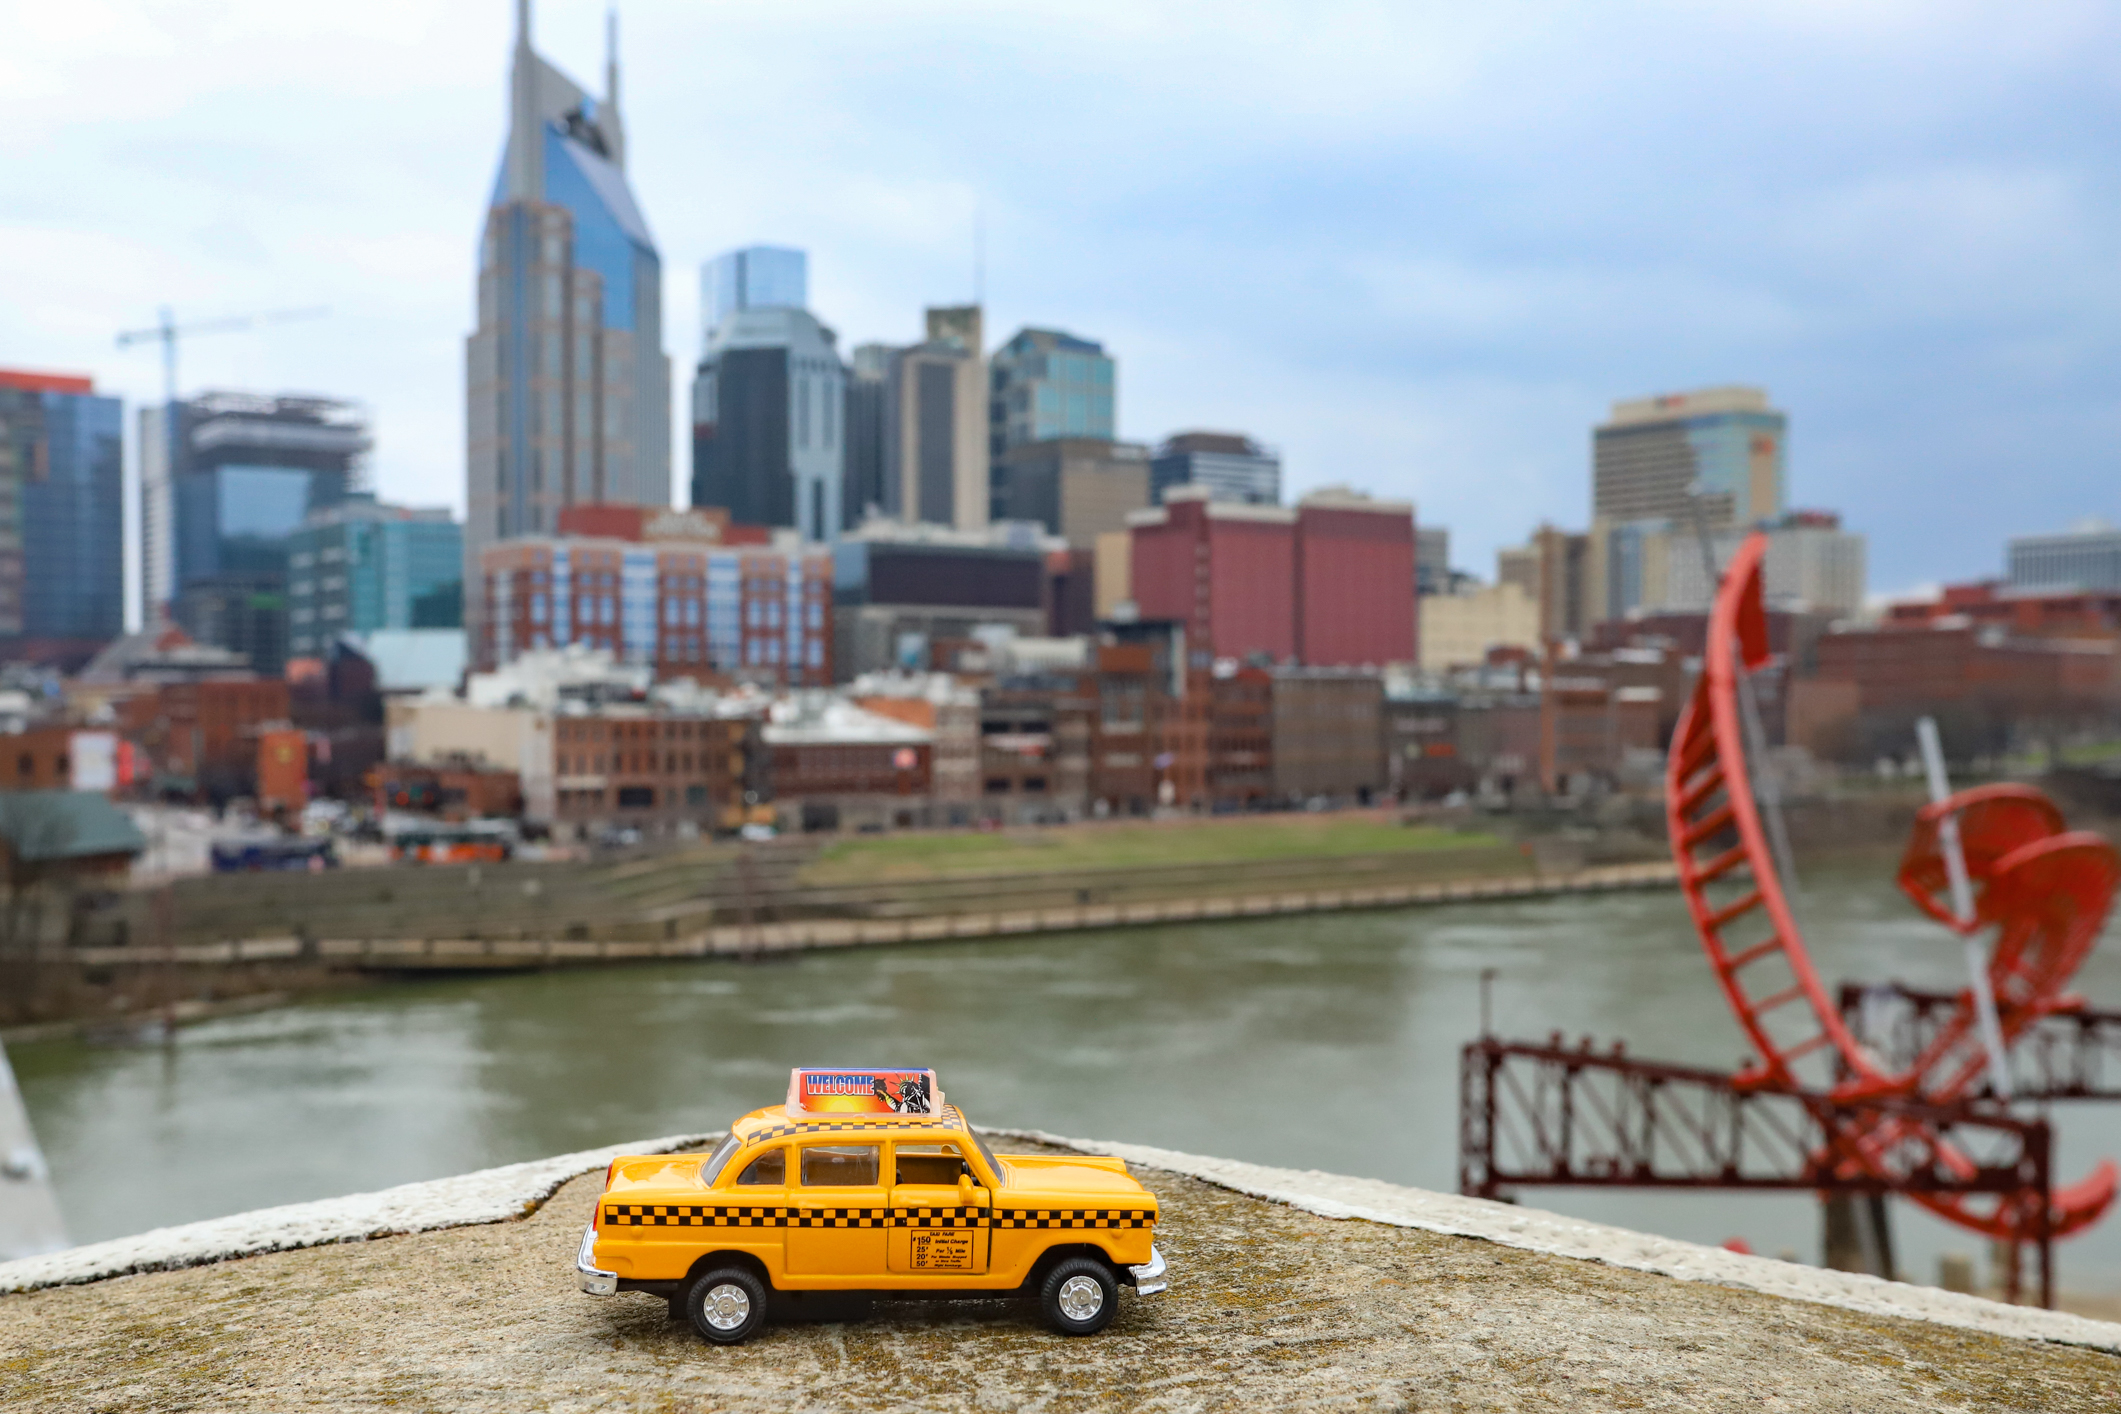 The Nashville, Tennessee skyline behind a yellow taxi. The coronavirus has taken a toll on transportation companies, especially in cities known for tourism, like Nashville.